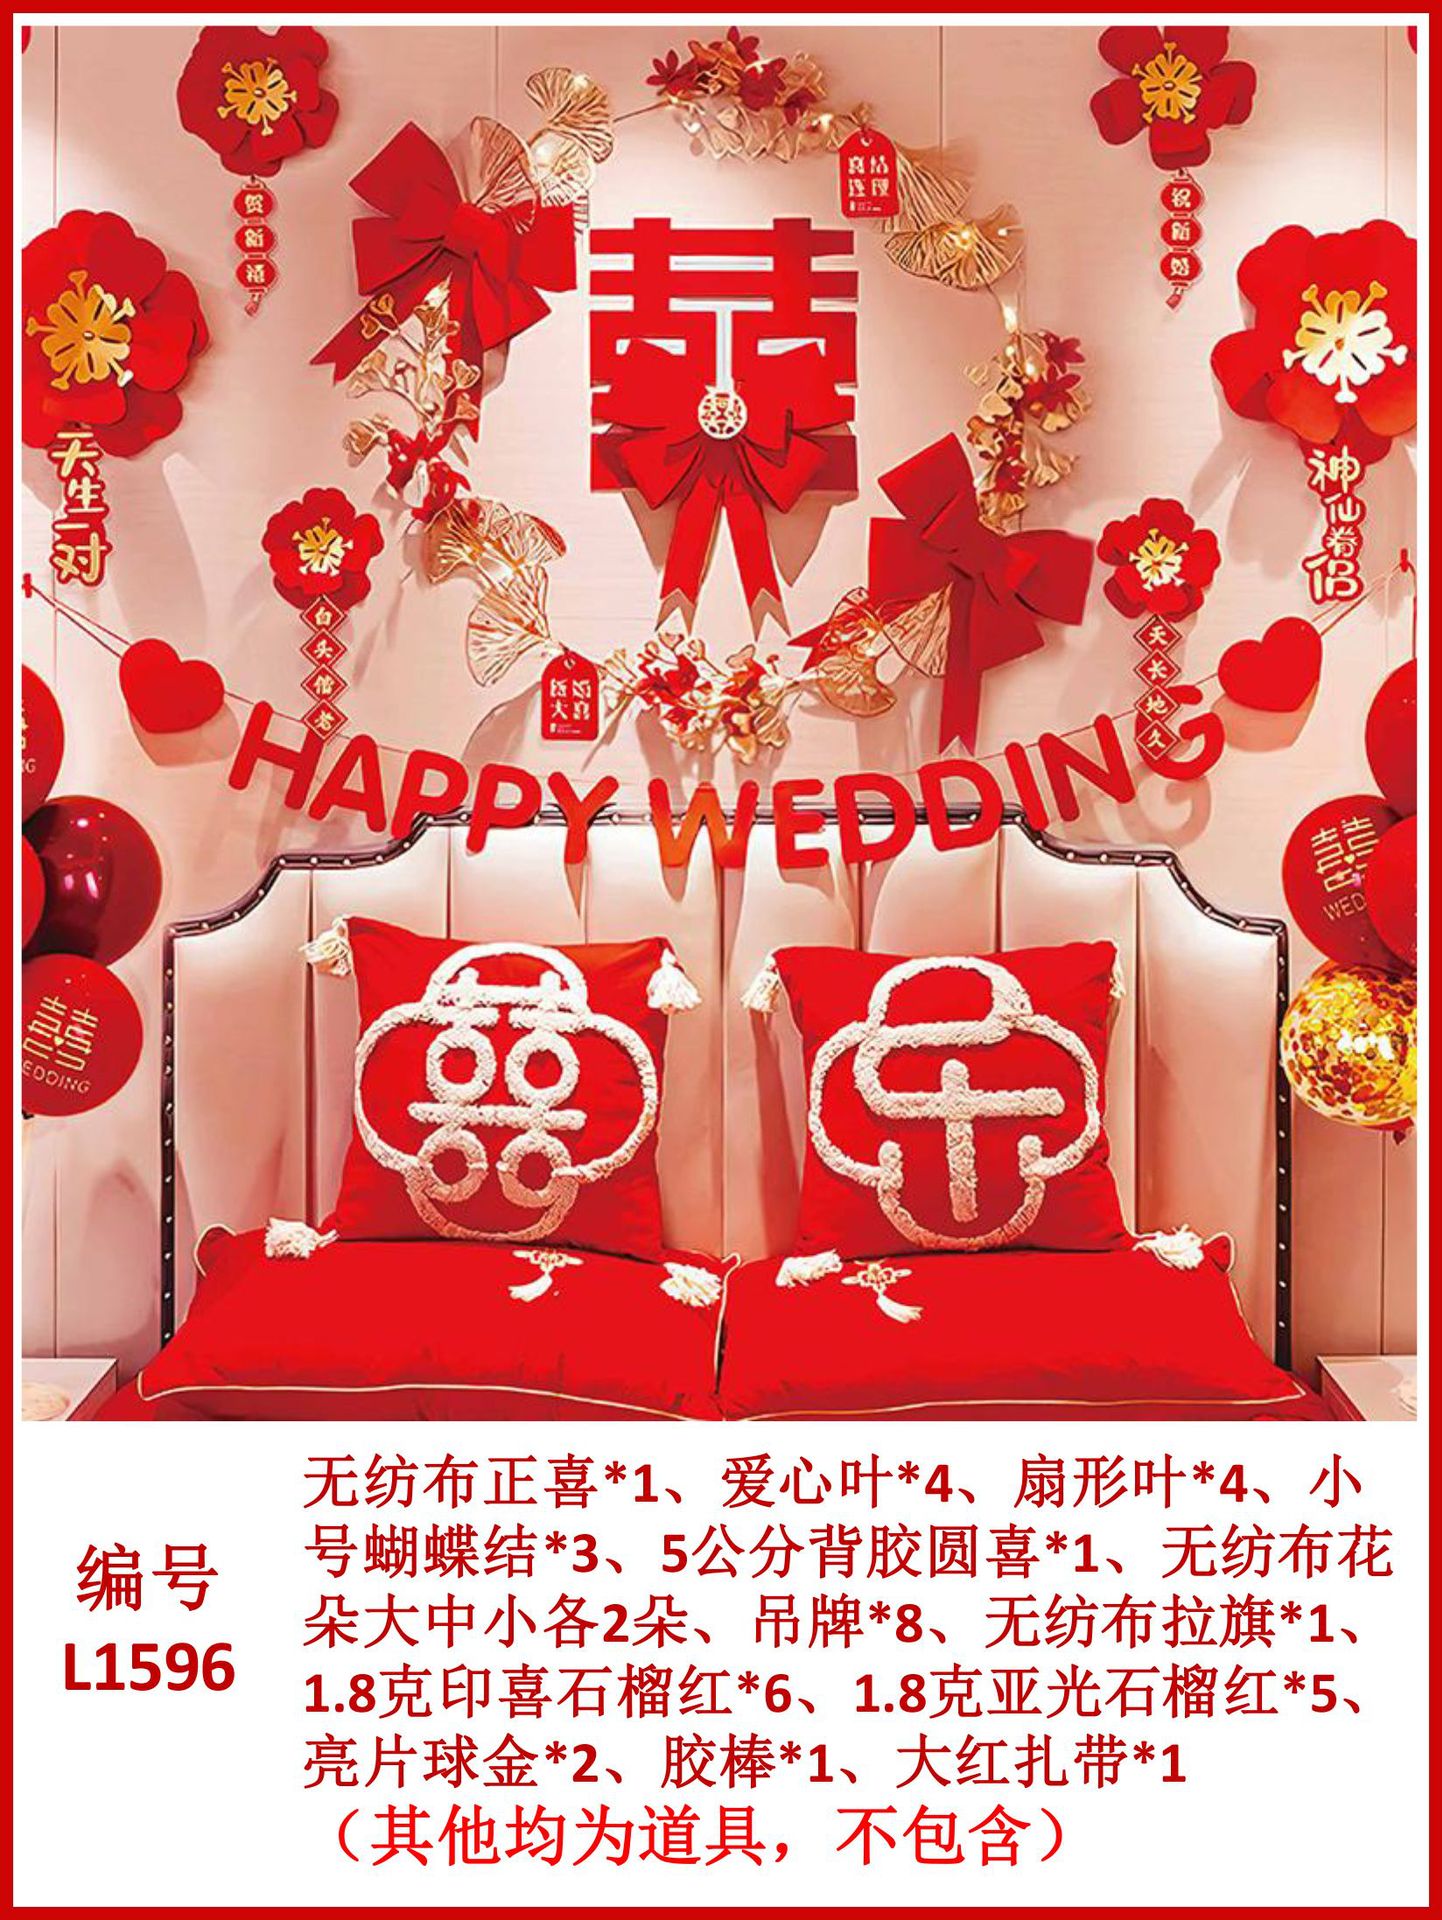 Wedding Men's and Women's Wedding Room Layout Wedding Planning Non-Woven Fabric Wedding Ceremony Layout Pomegranate Red Balloon Supplies Set